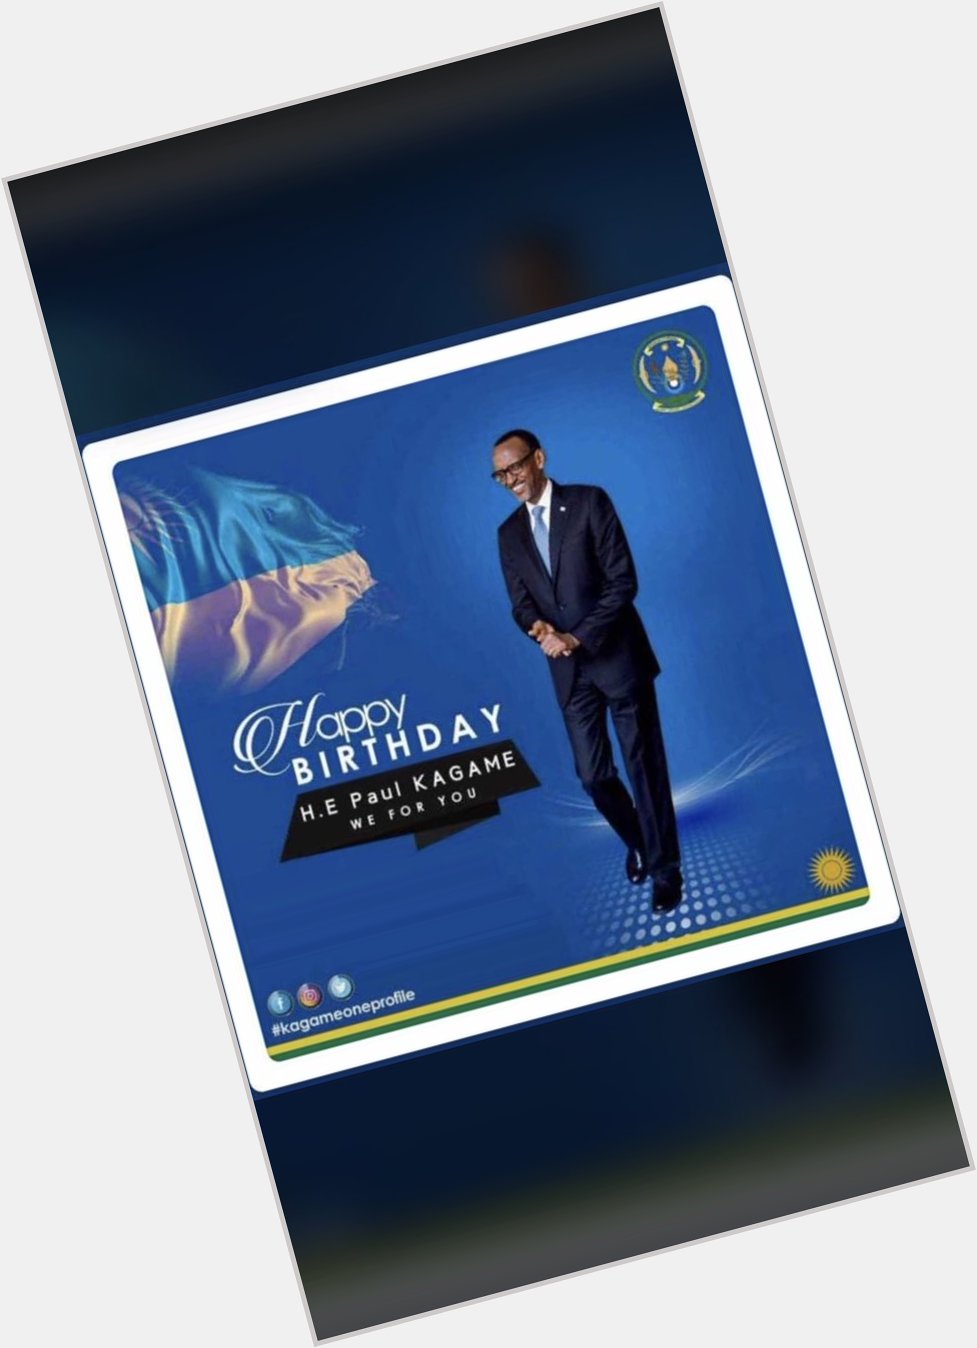 Happy birthday H.E Paul Kagame, you deserve all our appreciations. Long live our president      